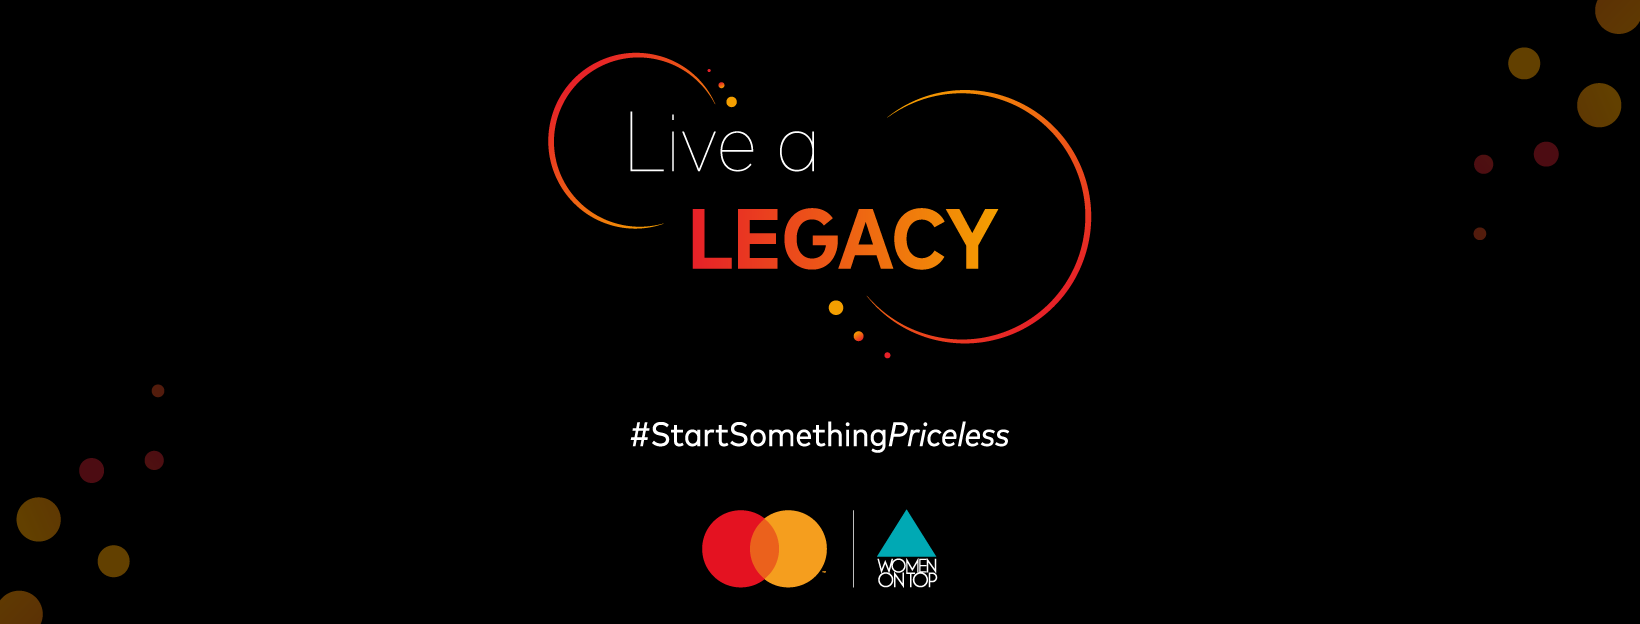 live-a-legacy_Facebook_Cover